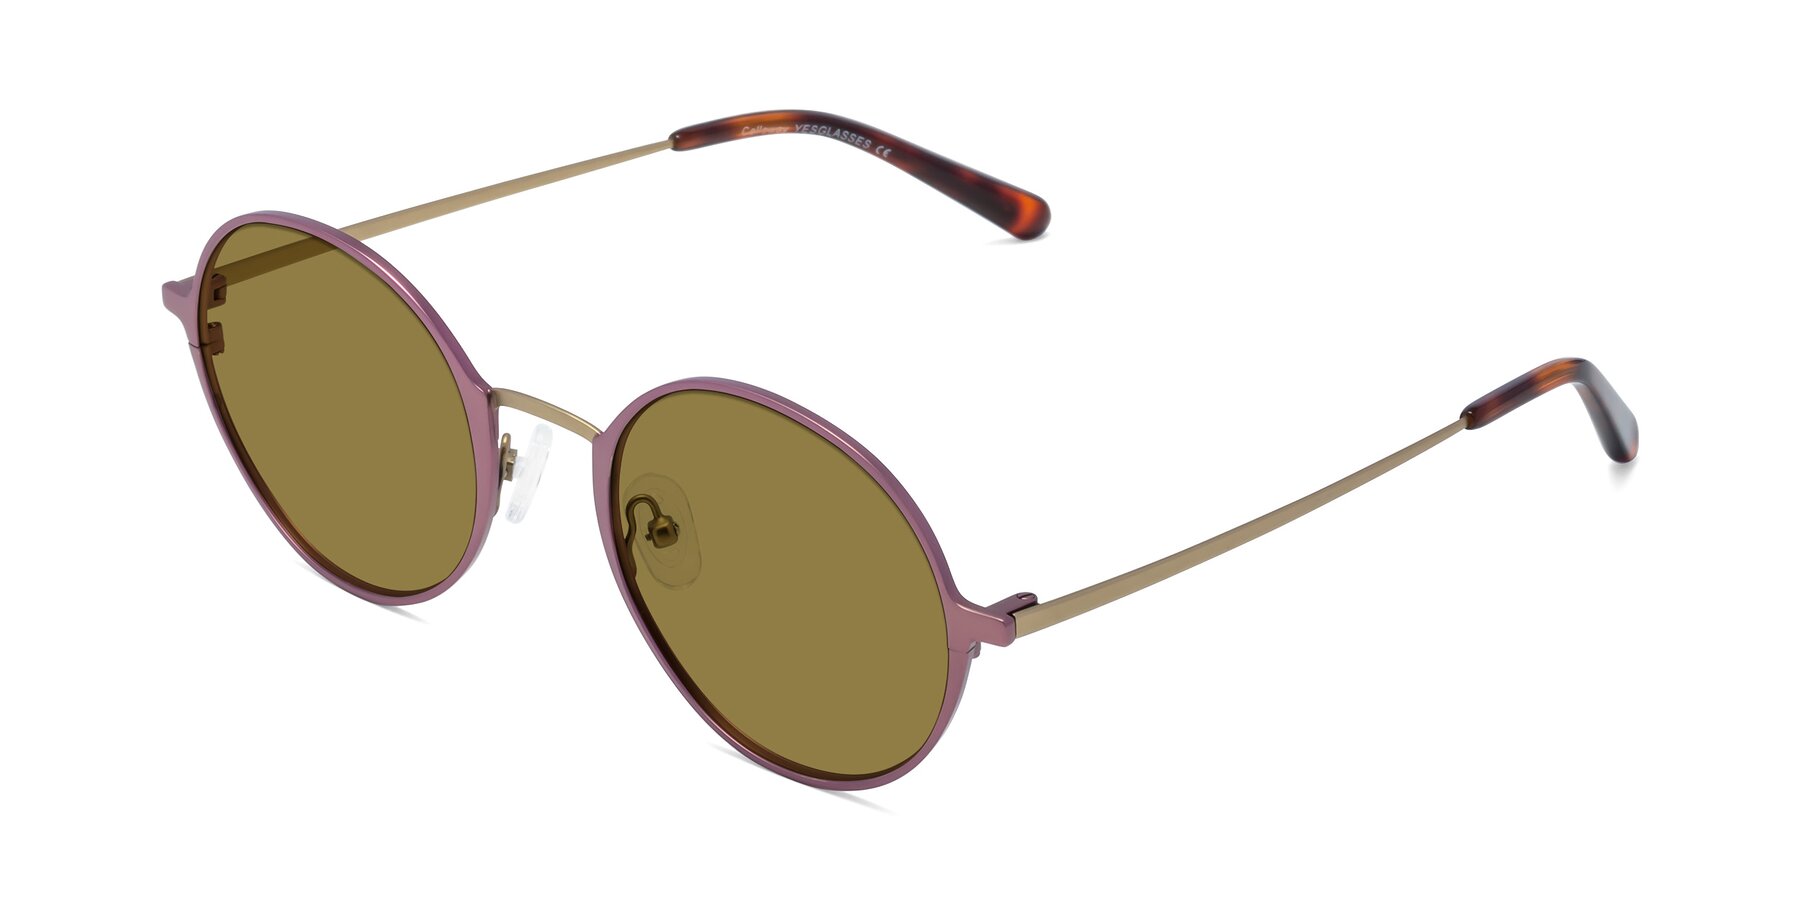 Angle of Calloway in Voliet-Copper with Brown Polarized Lenses